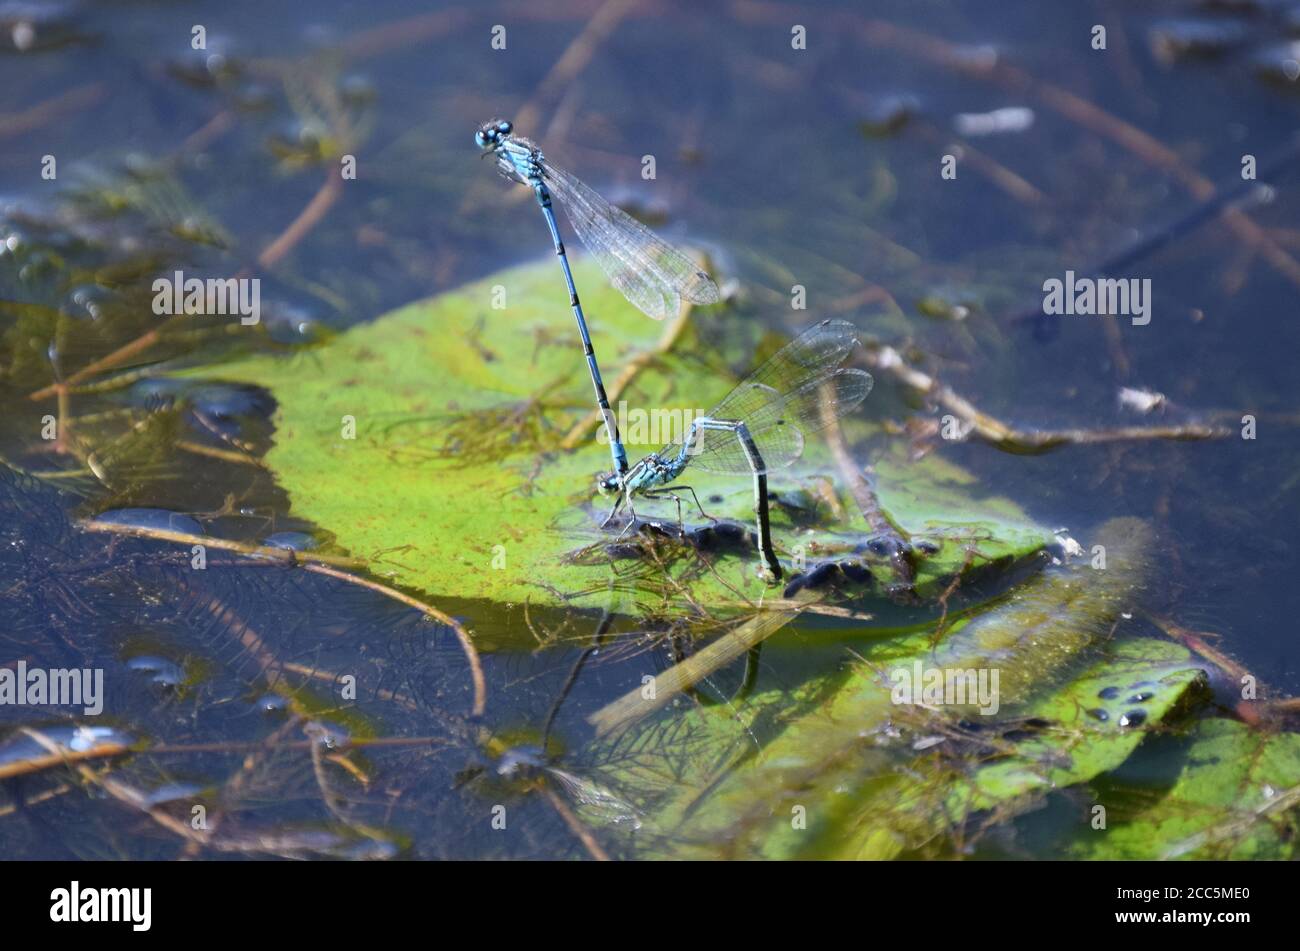 Common Blue Damselflies laying eggs in water Stock Photo